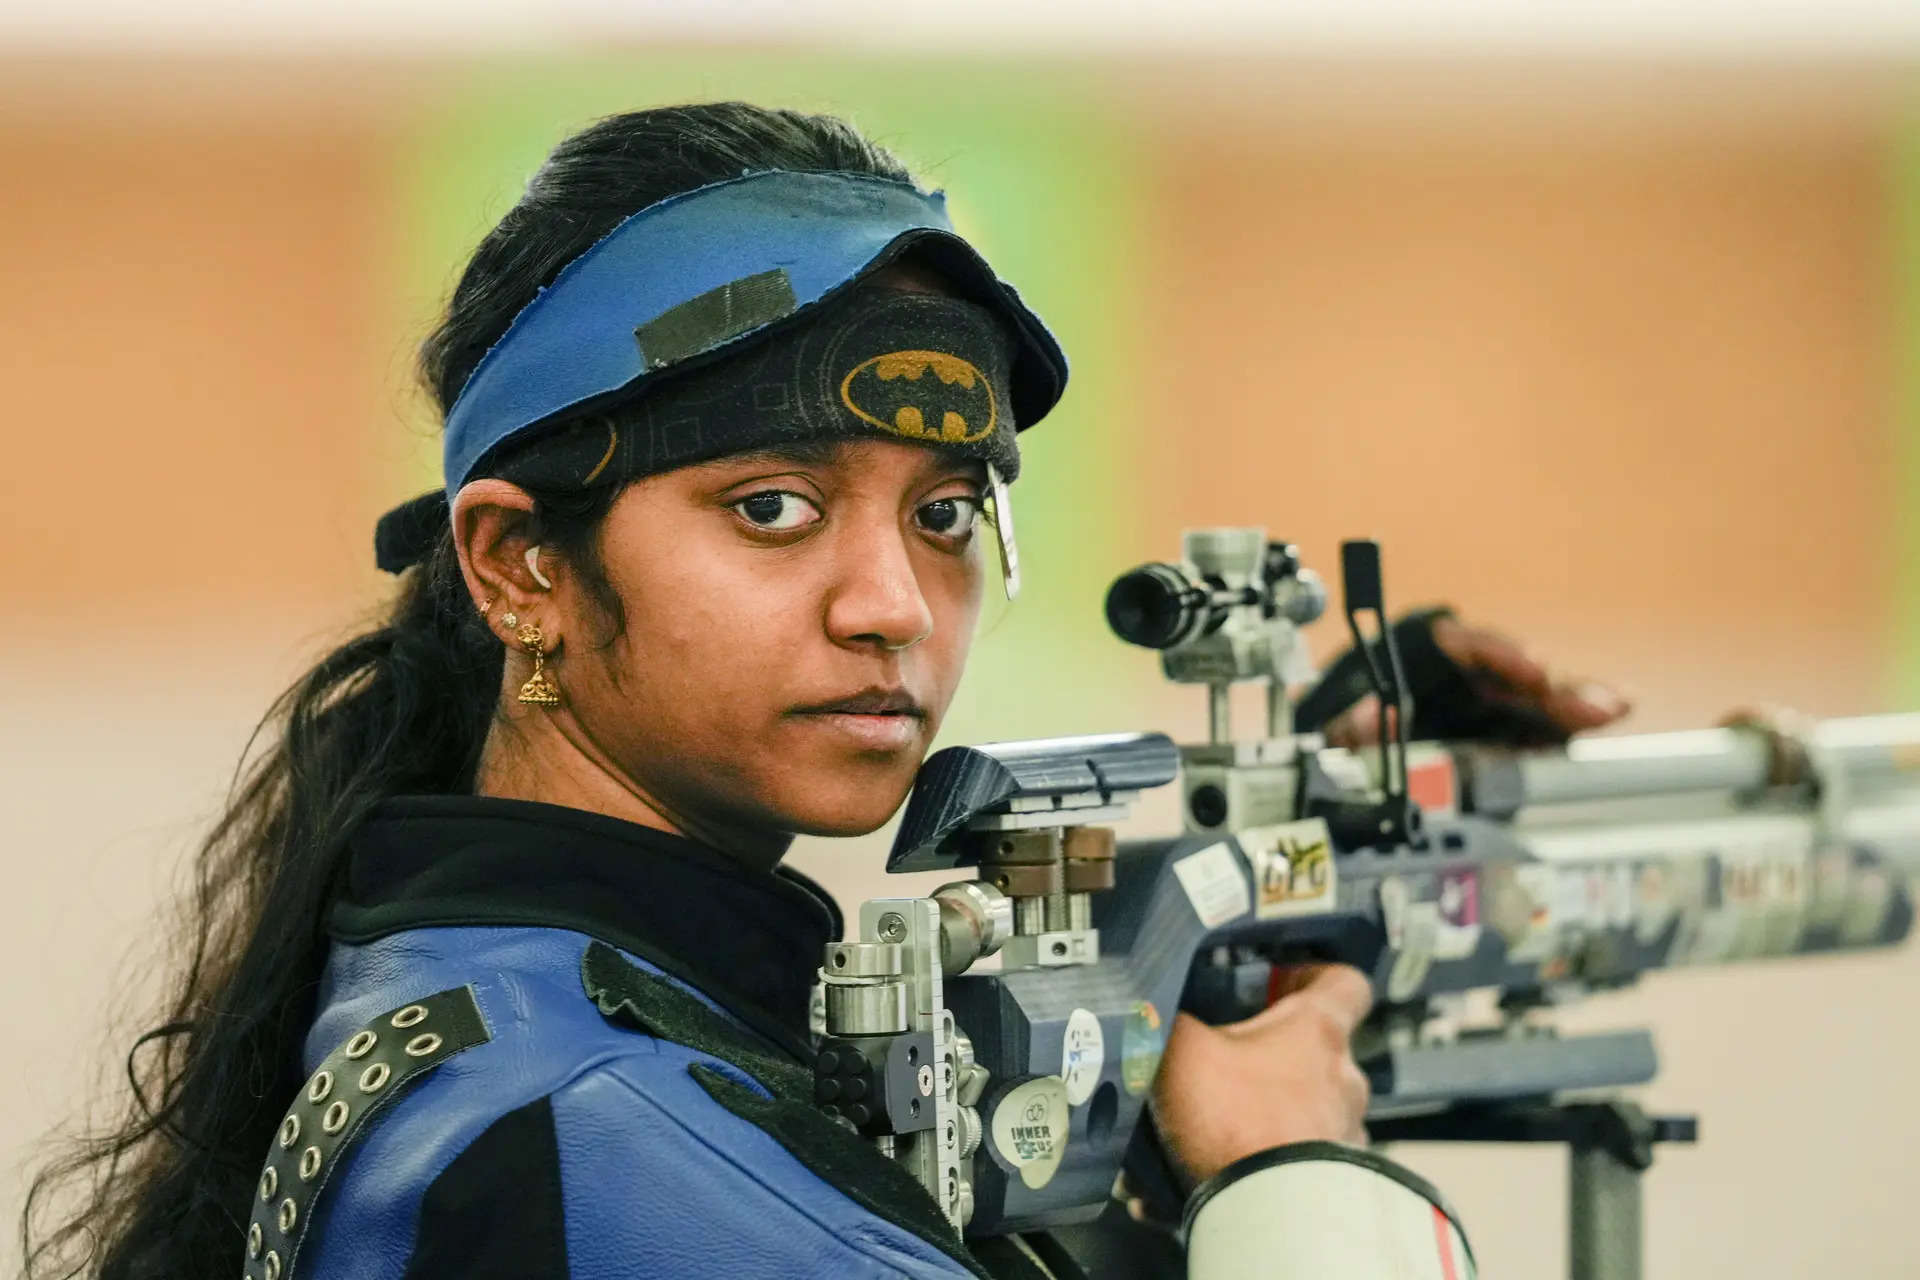 Paris Olympics: India's first heartbreak comes with Indian team losing by 1 point in mixed 10m air rifle shooting 